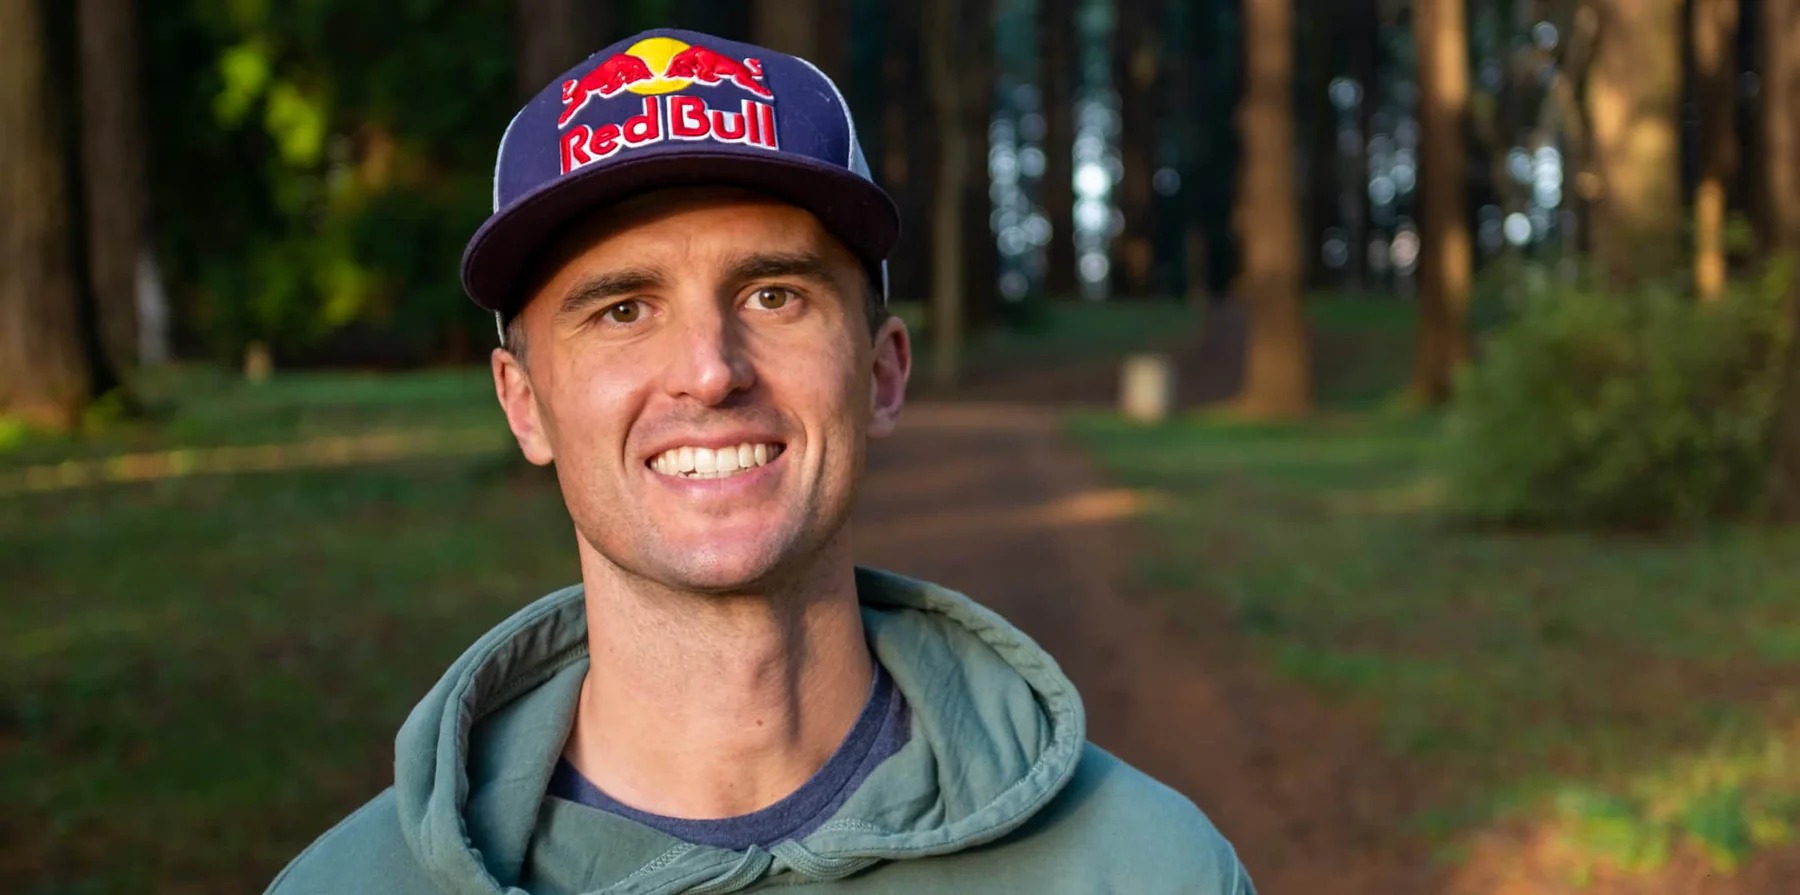 Report: Red Bull’s Top Runner Dylan Bowman Announces Unexpected Departure Due …